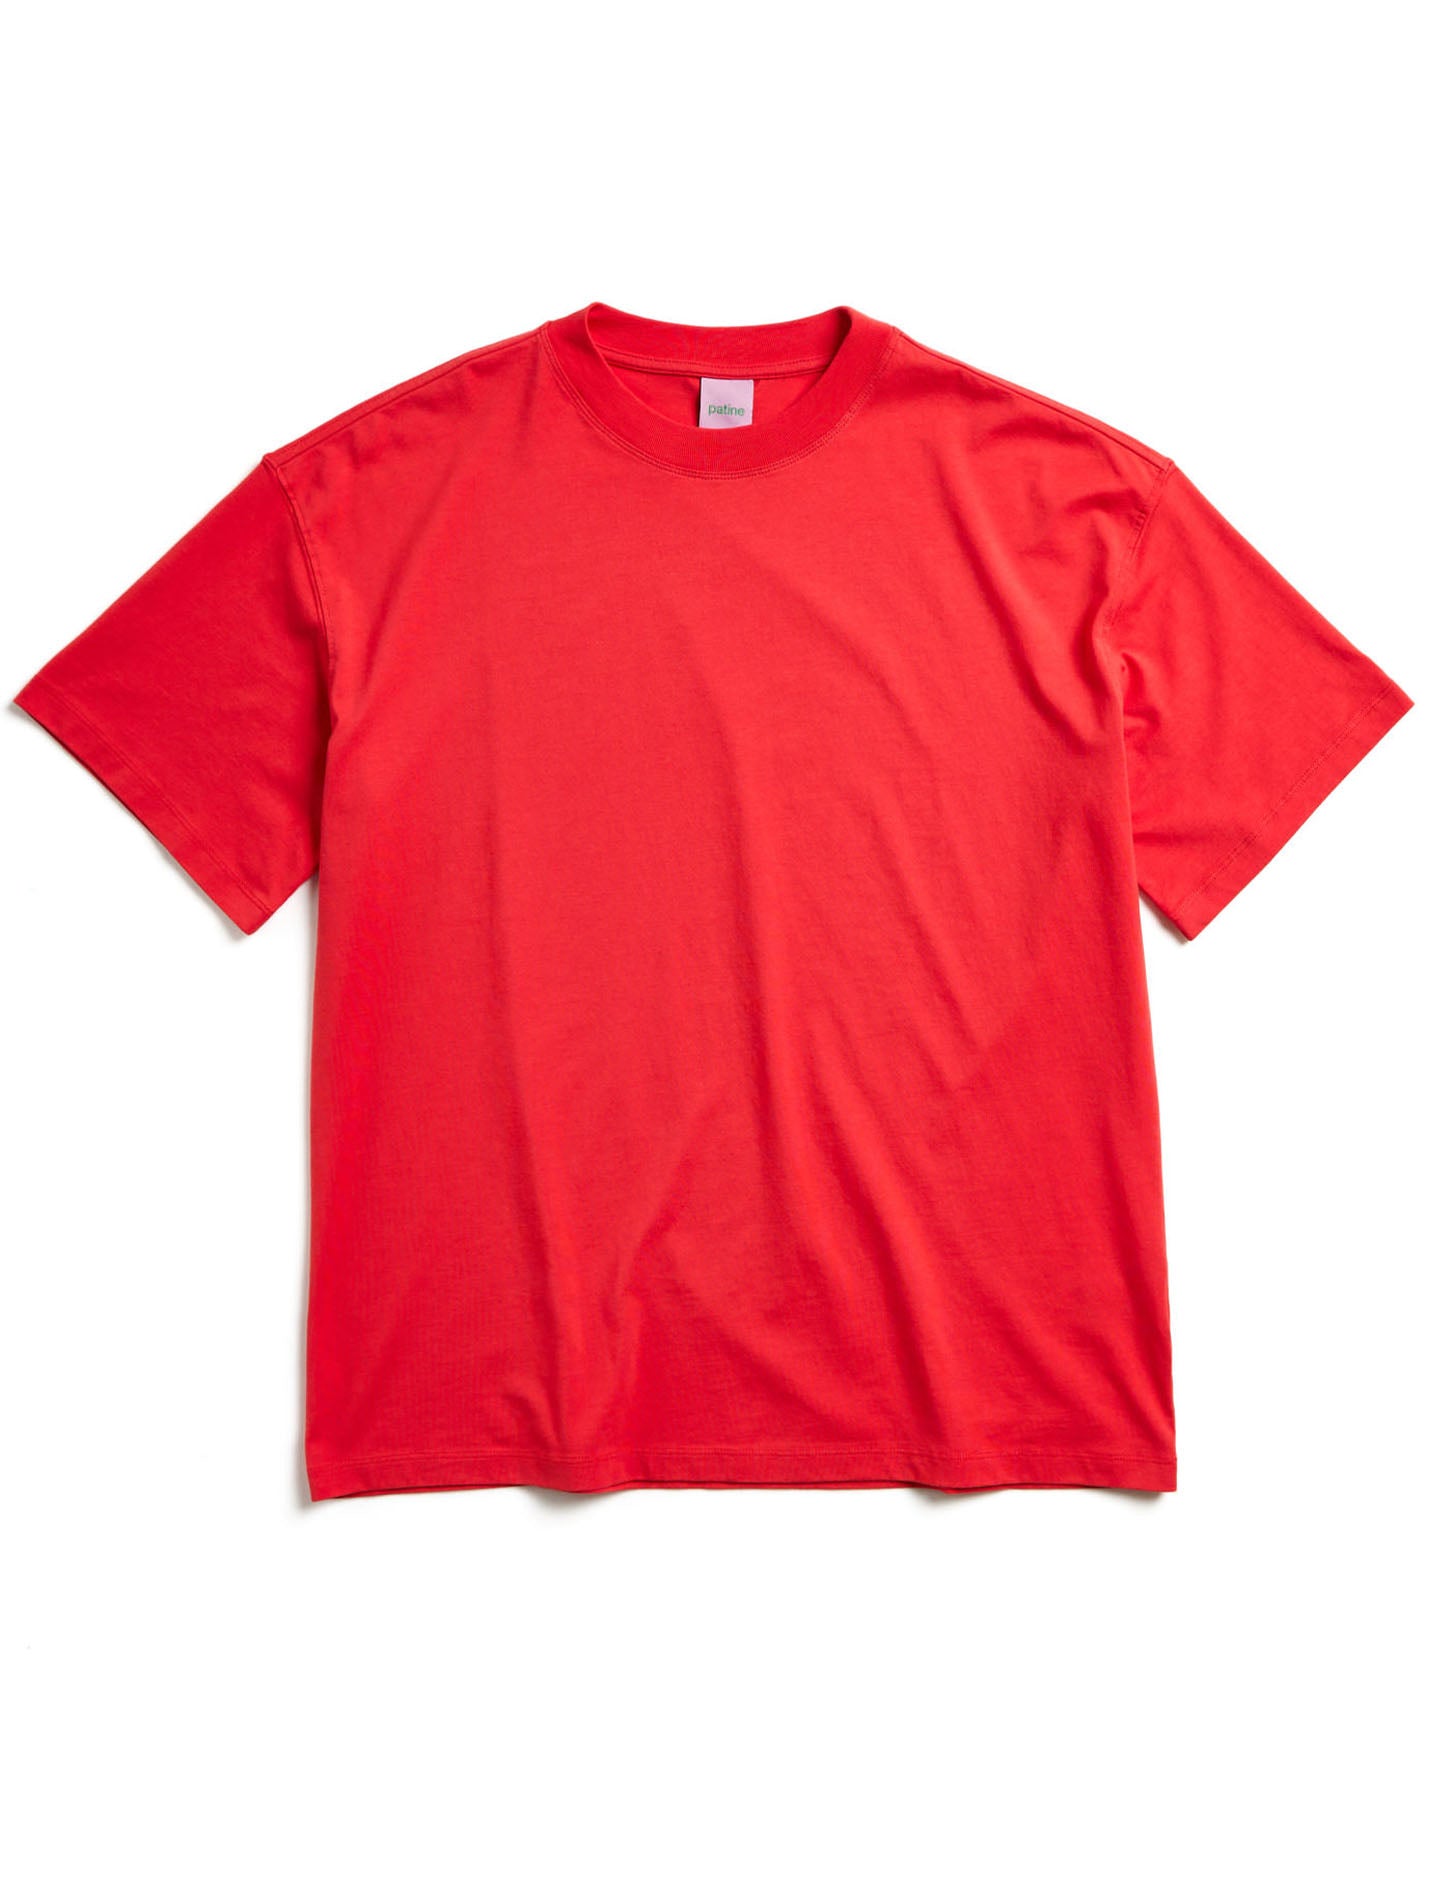 Le tee-shirt Super Willie® jersey bio-recyclé Rouge tomato